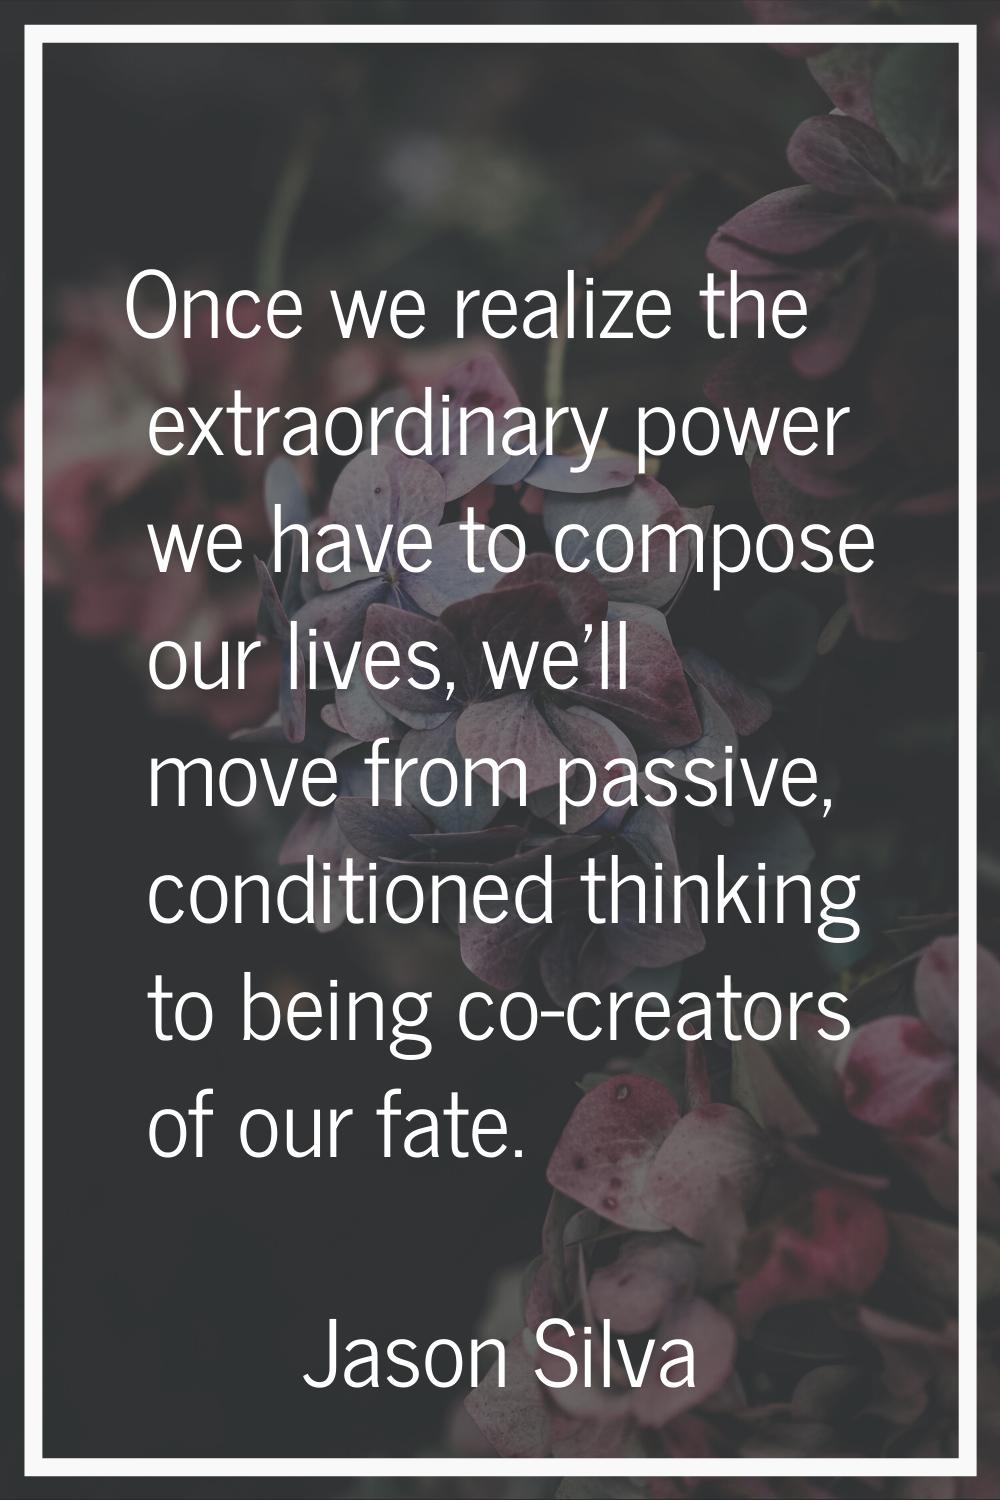 Once we realize the extraordinary power we have to compose our lives, we'll move from passive, cond